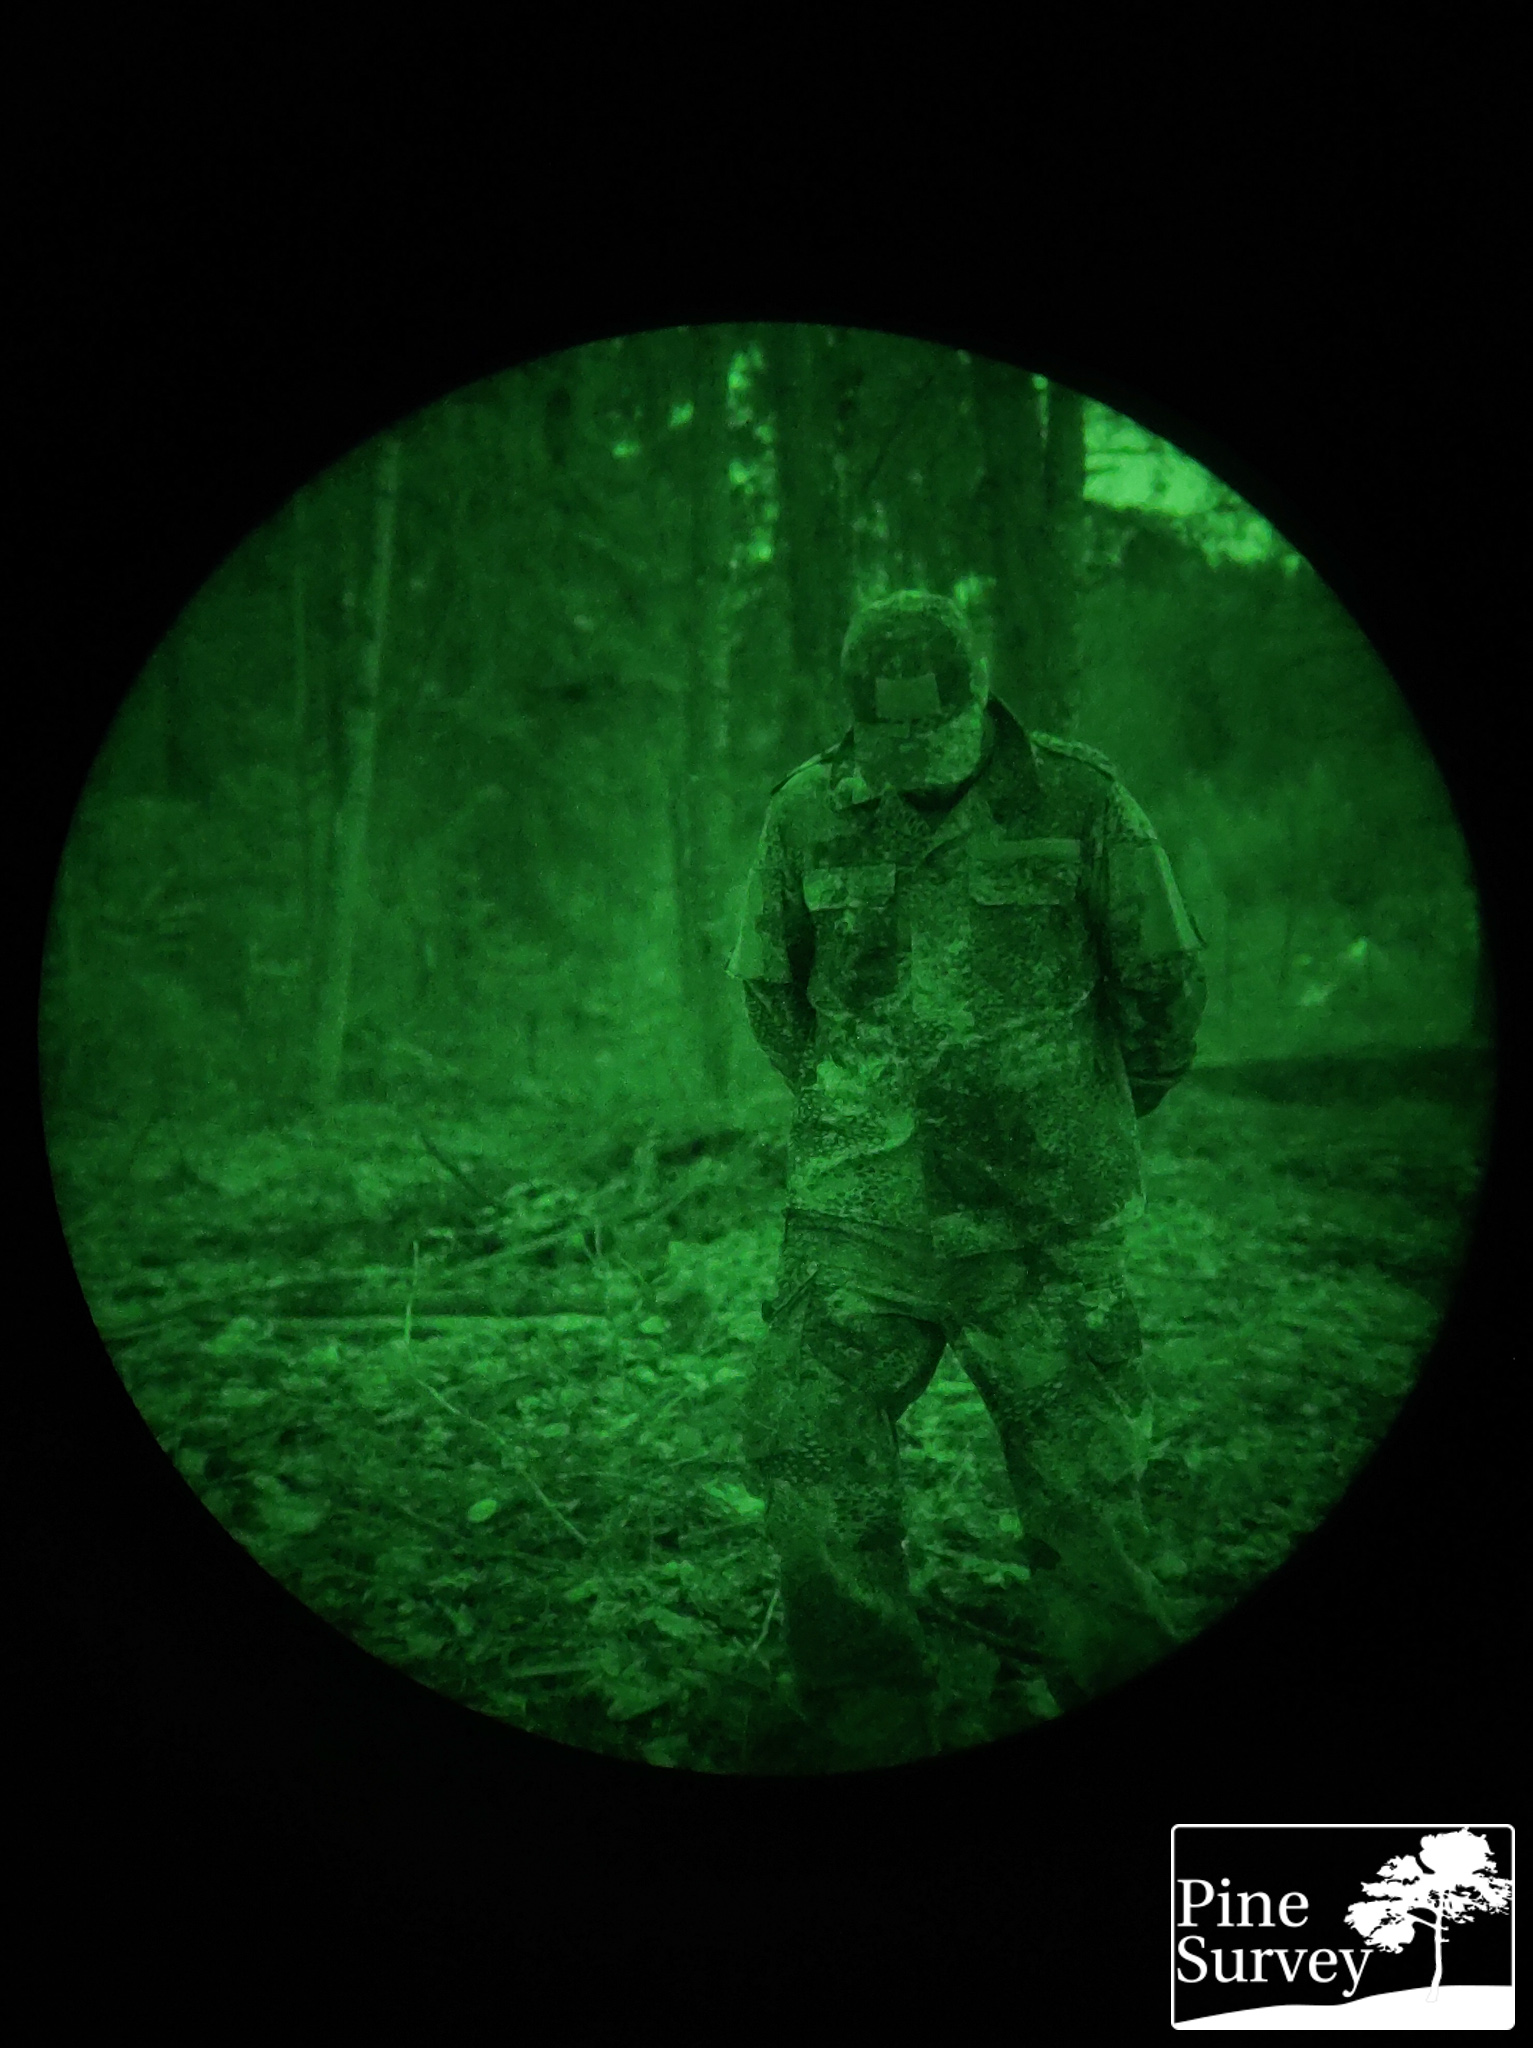 Camouflage and Night Vision: Expectations vs Reality - Pine Survey